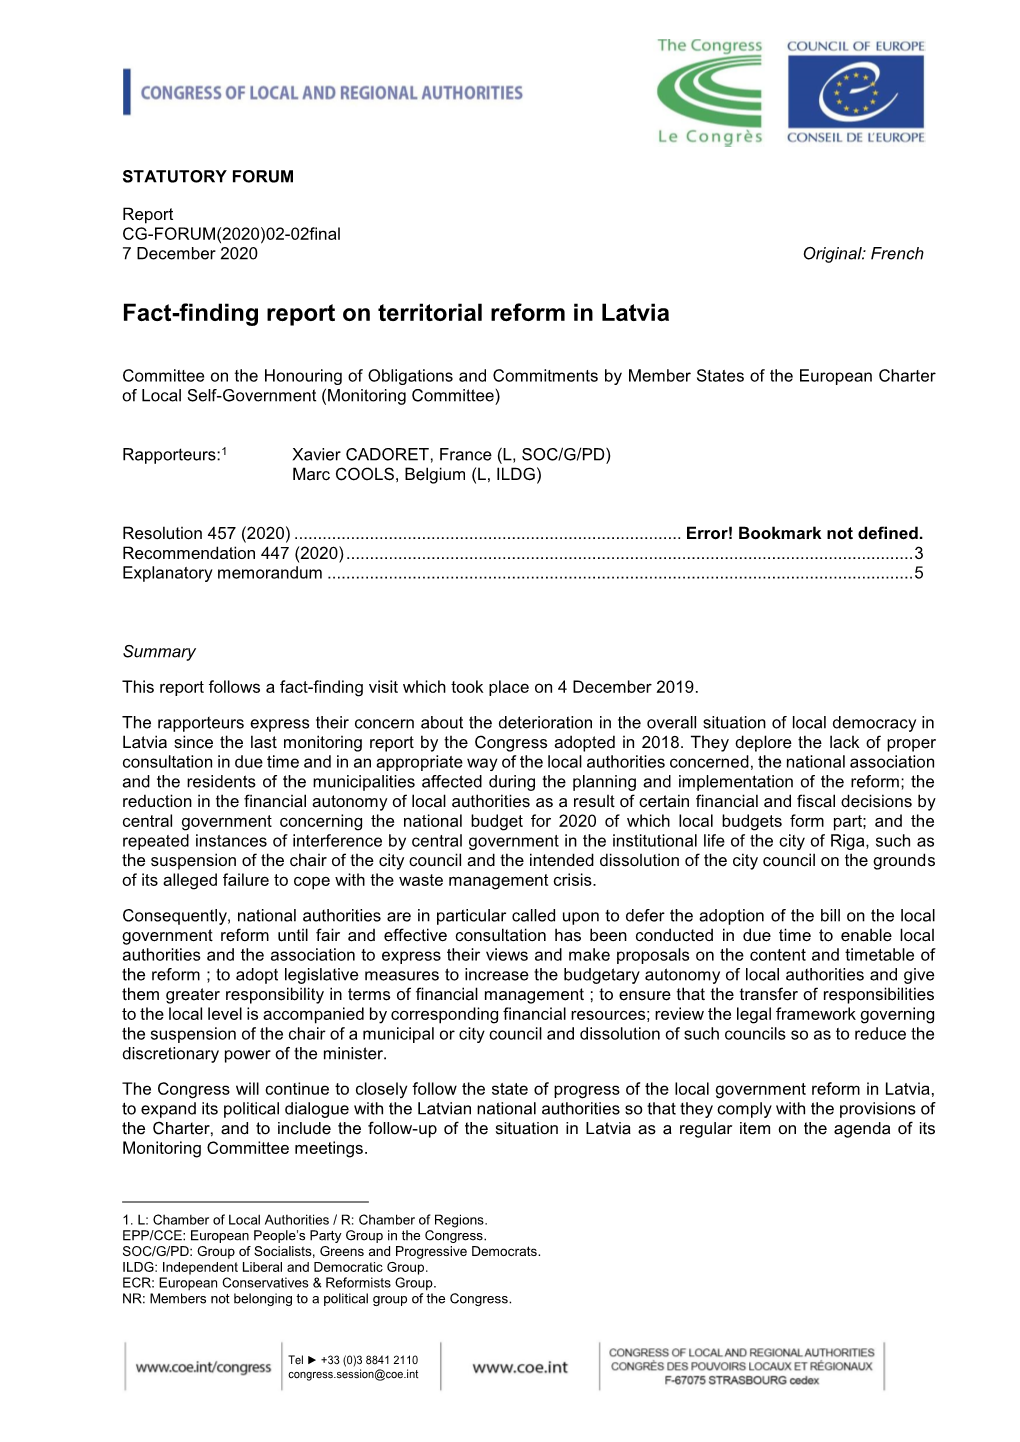 Fact-Finding Report on Territorial Reform in Latvia